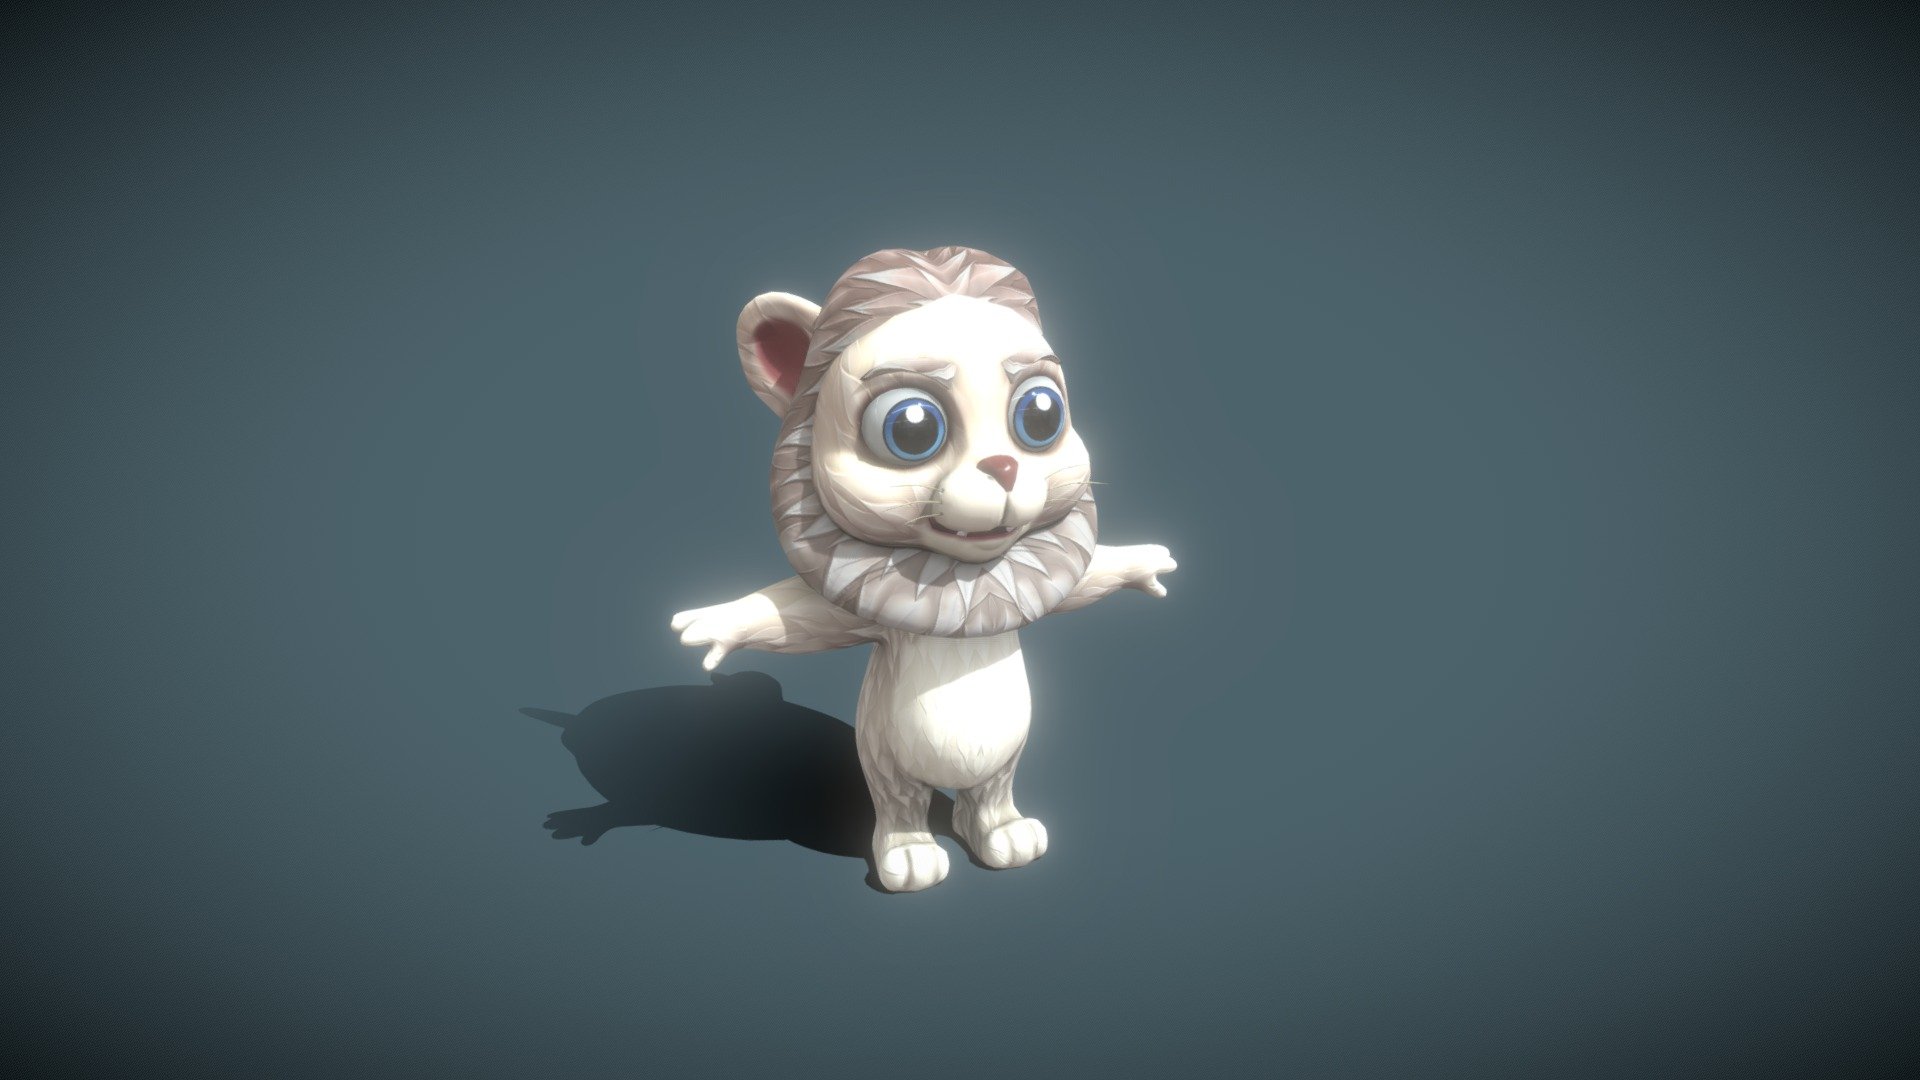 Cartoon White Lion Rigged 3D Model is completely ready to be used in your games, animations, films, designs etc.  

All textures and materials are included and mapped in every format. The model is completely ready for visualization in any 3d software and engine.  

Technical details:  


File formats included in the package are: FBX, OBJ, GLB, ABC, DAE, PLY, STL, BLEND, gLTF (generated), USDZ (generated)
Native software file format: BLEND
Render engine: Eevee
Polygons: 7,218
Vertices: 6,884
Textures: Color, Metallic, Roughness, Normal, AO
All textures are 2k resolution
The model is rigged
We have another model with animations
Only following formats contain rig: BLEND, FBX, GLTF/GLB
 - Cartoon White Lion Rigged 3D Model - Buy Royalty Free 3D model by 3DDisco 3d model